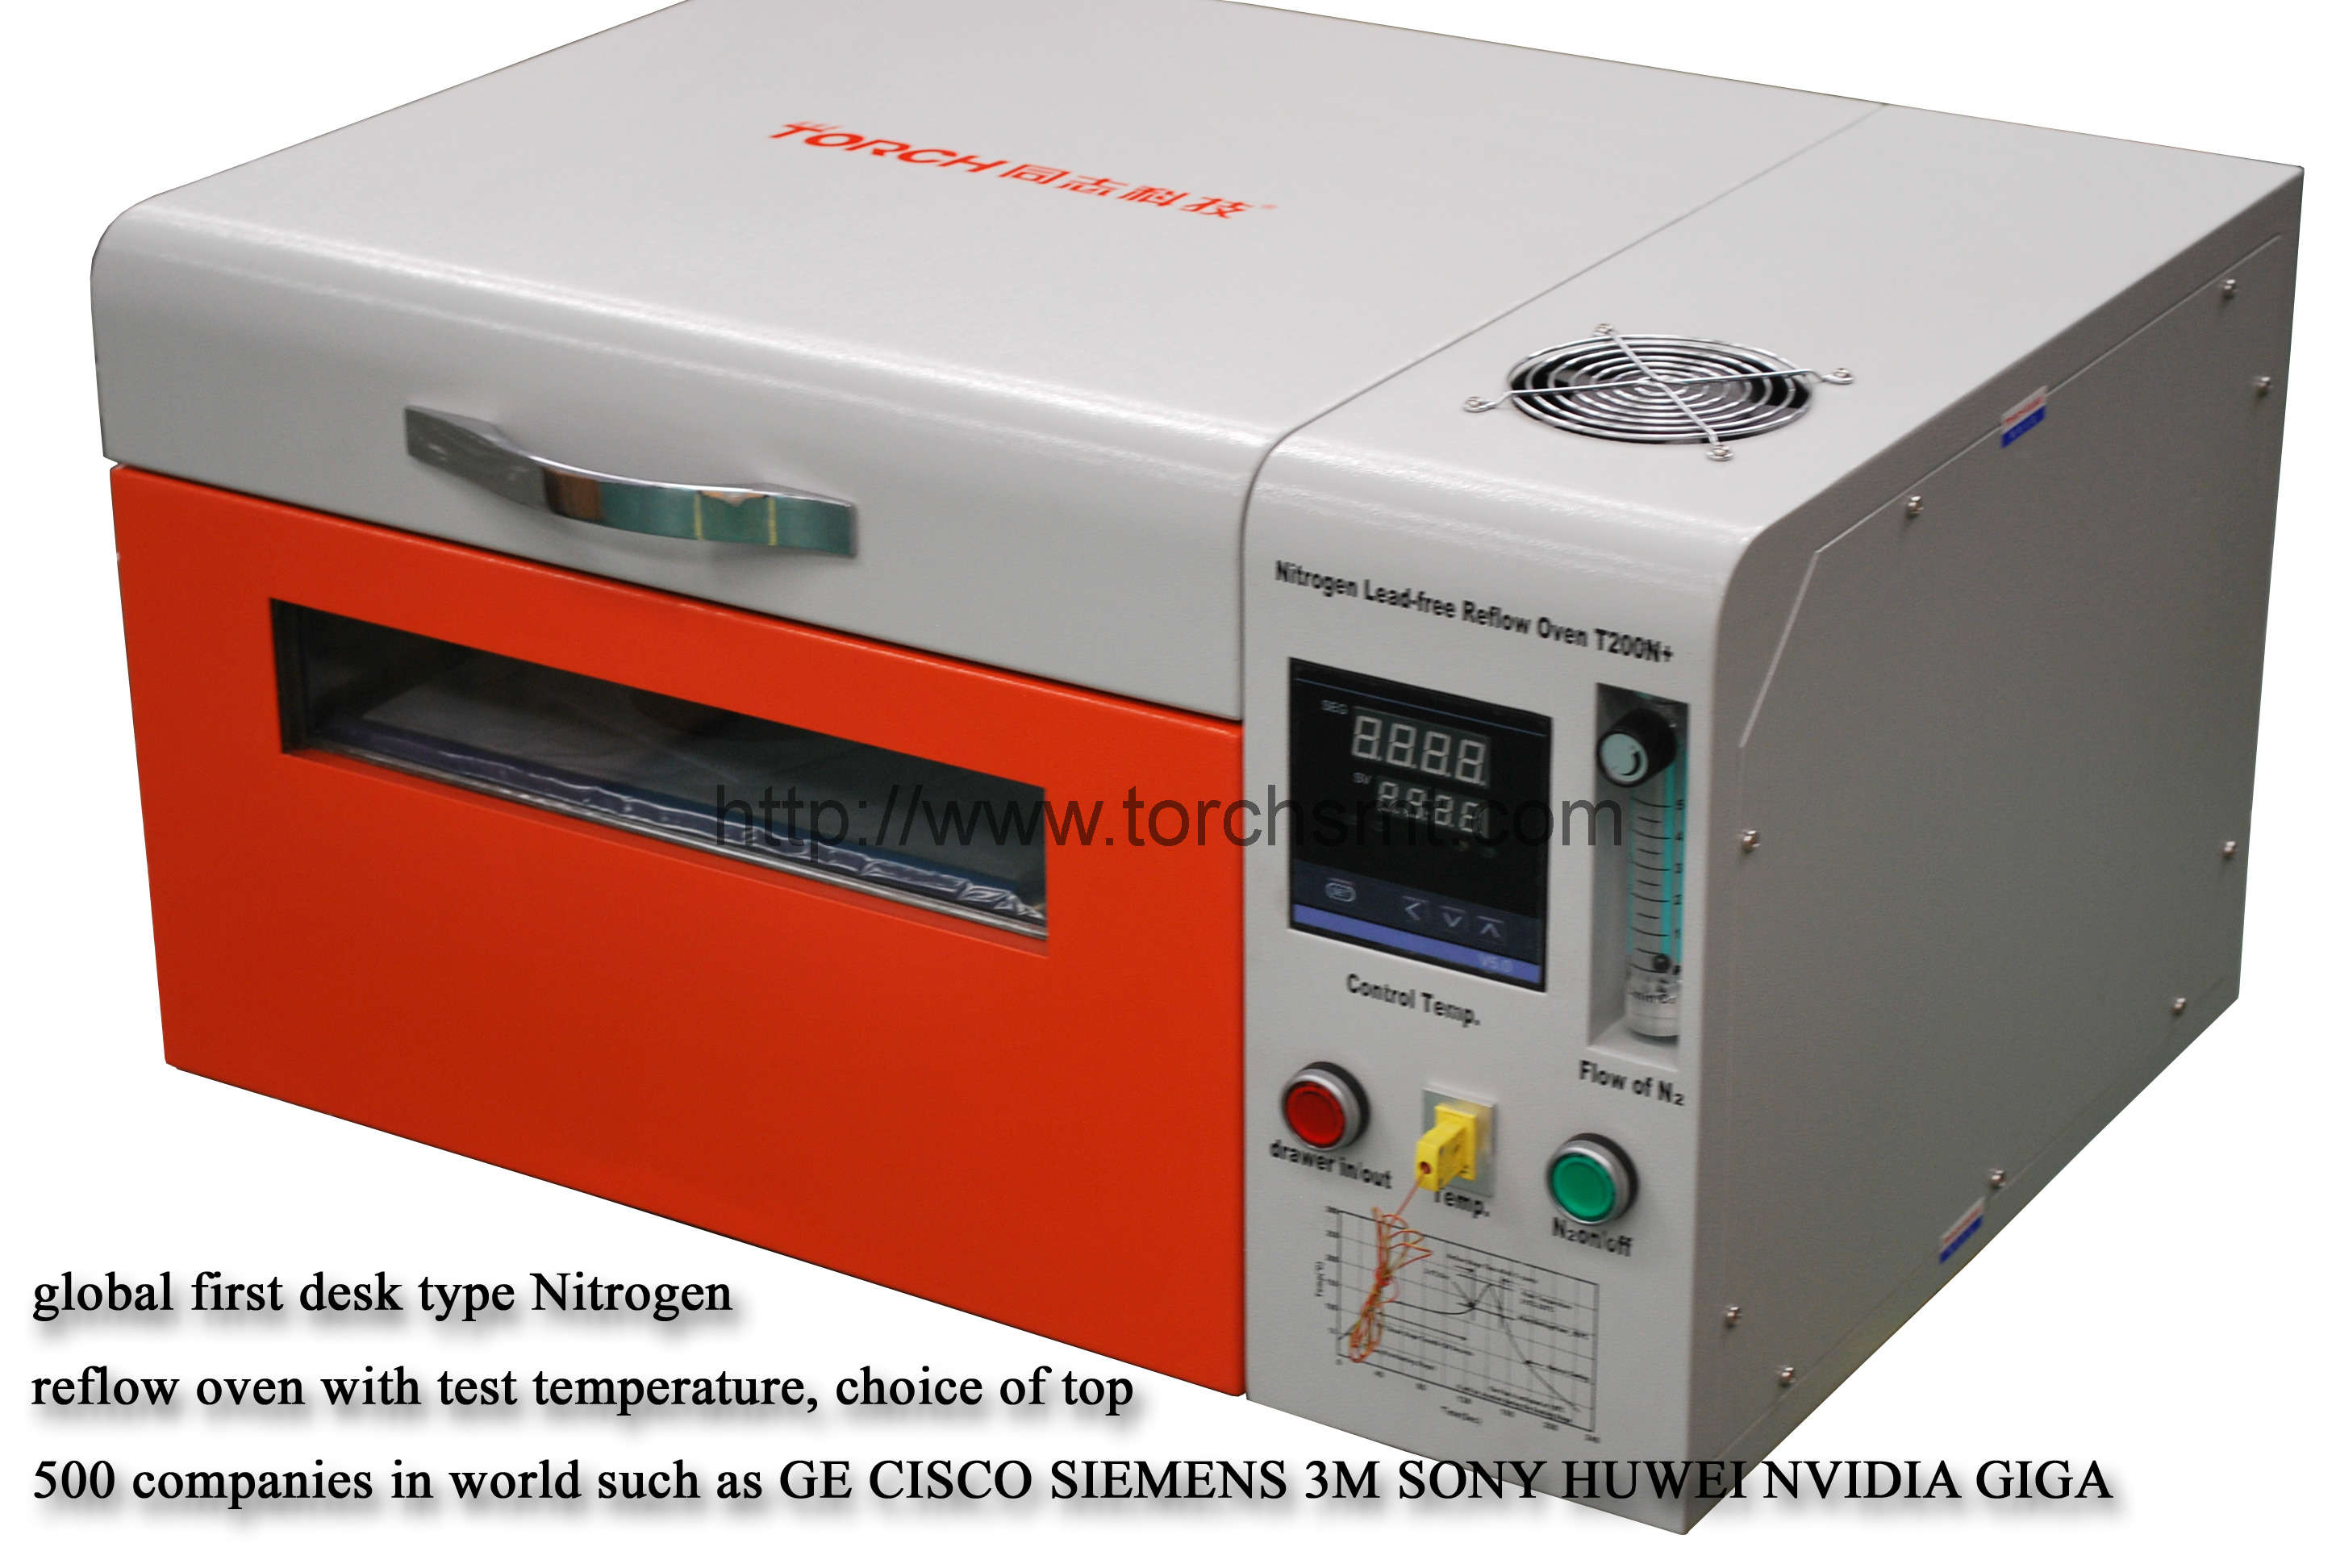 Lead free reflow oven with temperature testing T200N+